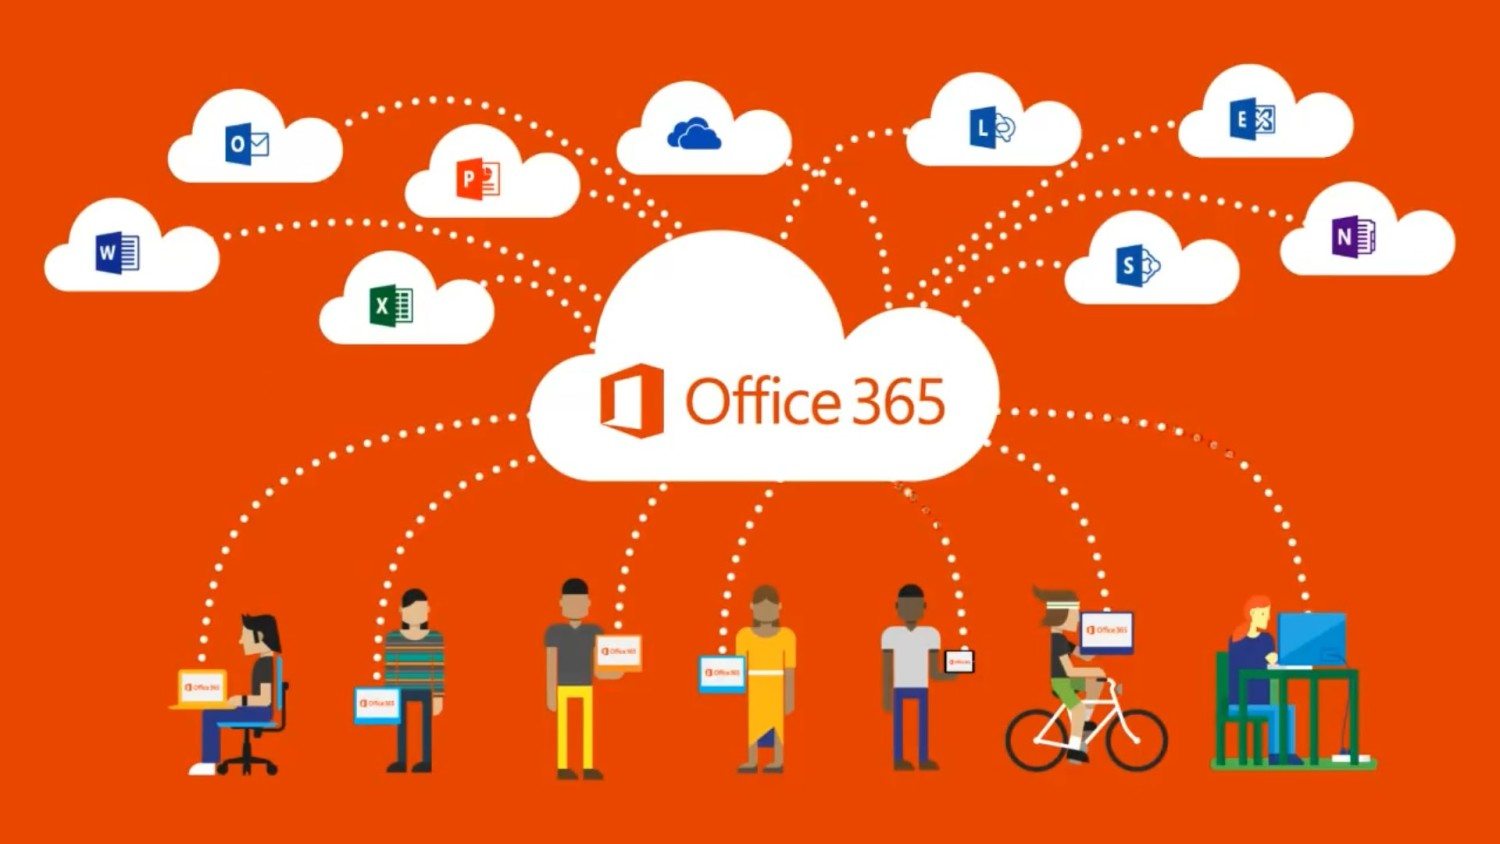 Migration to Office 365 in Best Ways - Choose the Finest One